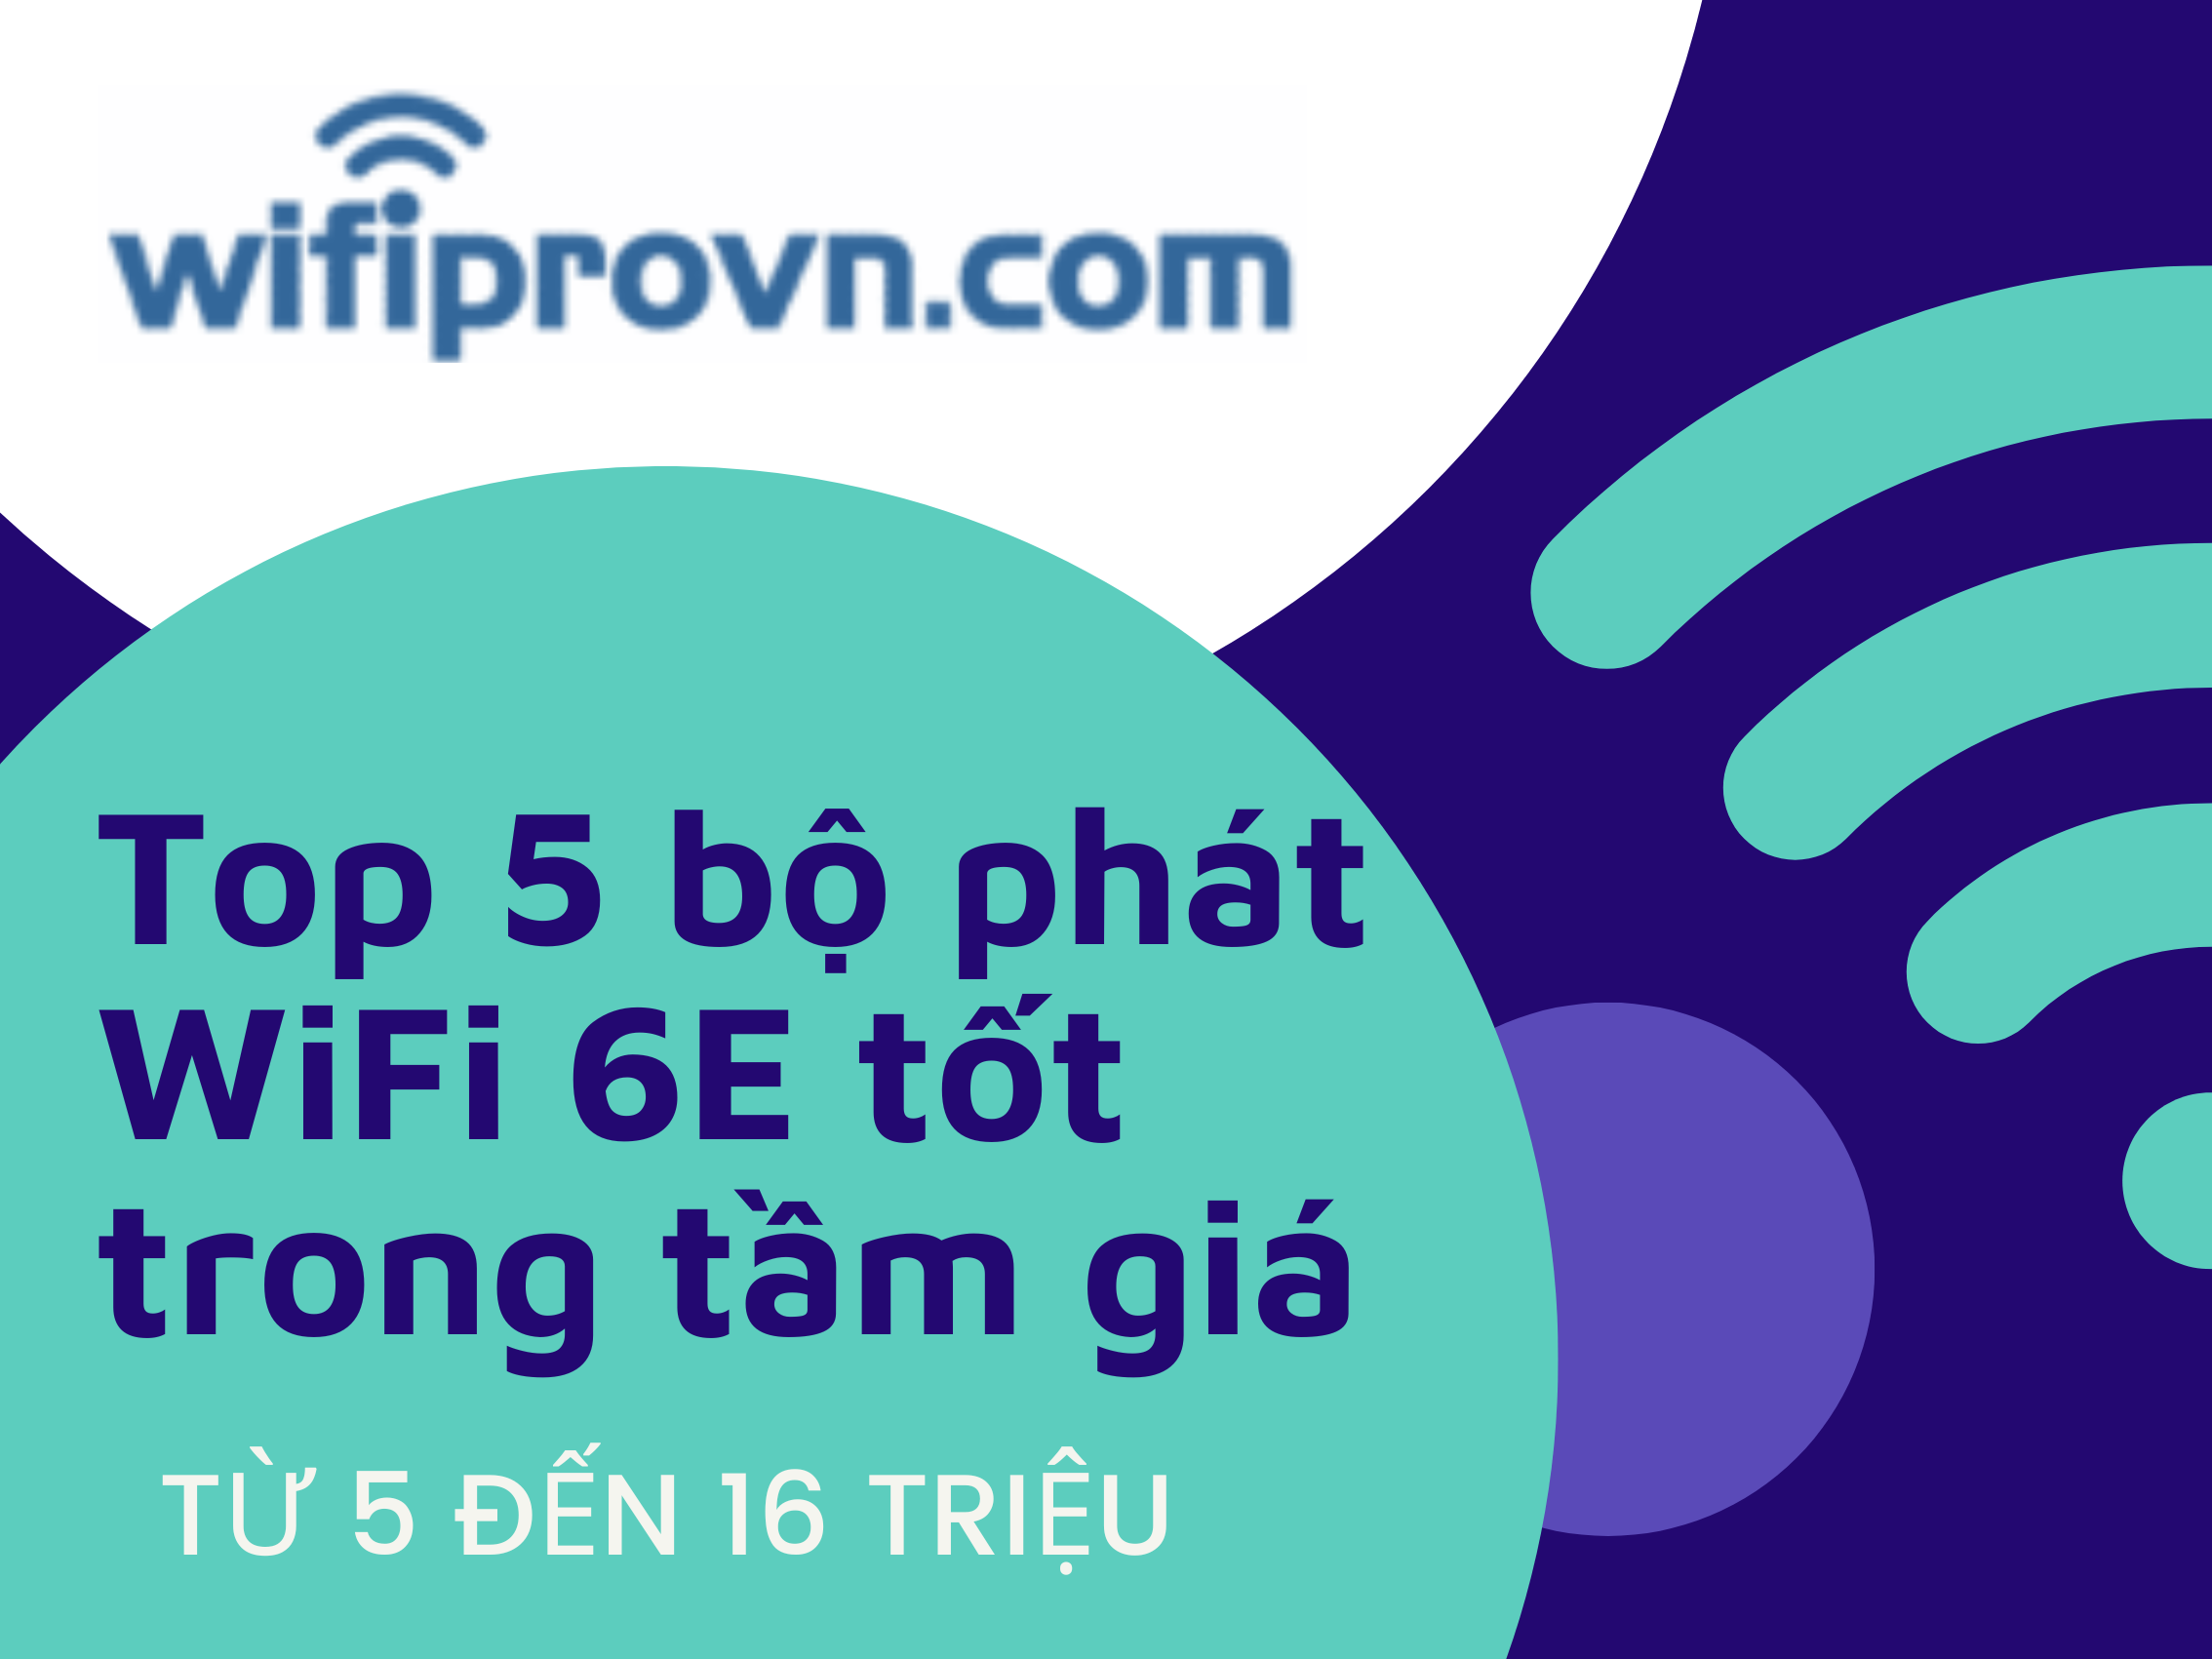 https://www.wifiprovn.com/mang-co-ban-cau-hinh-router-thanh-access-point-truy-cap-wi-fi-dung-chung-voi-router-nha-mang/